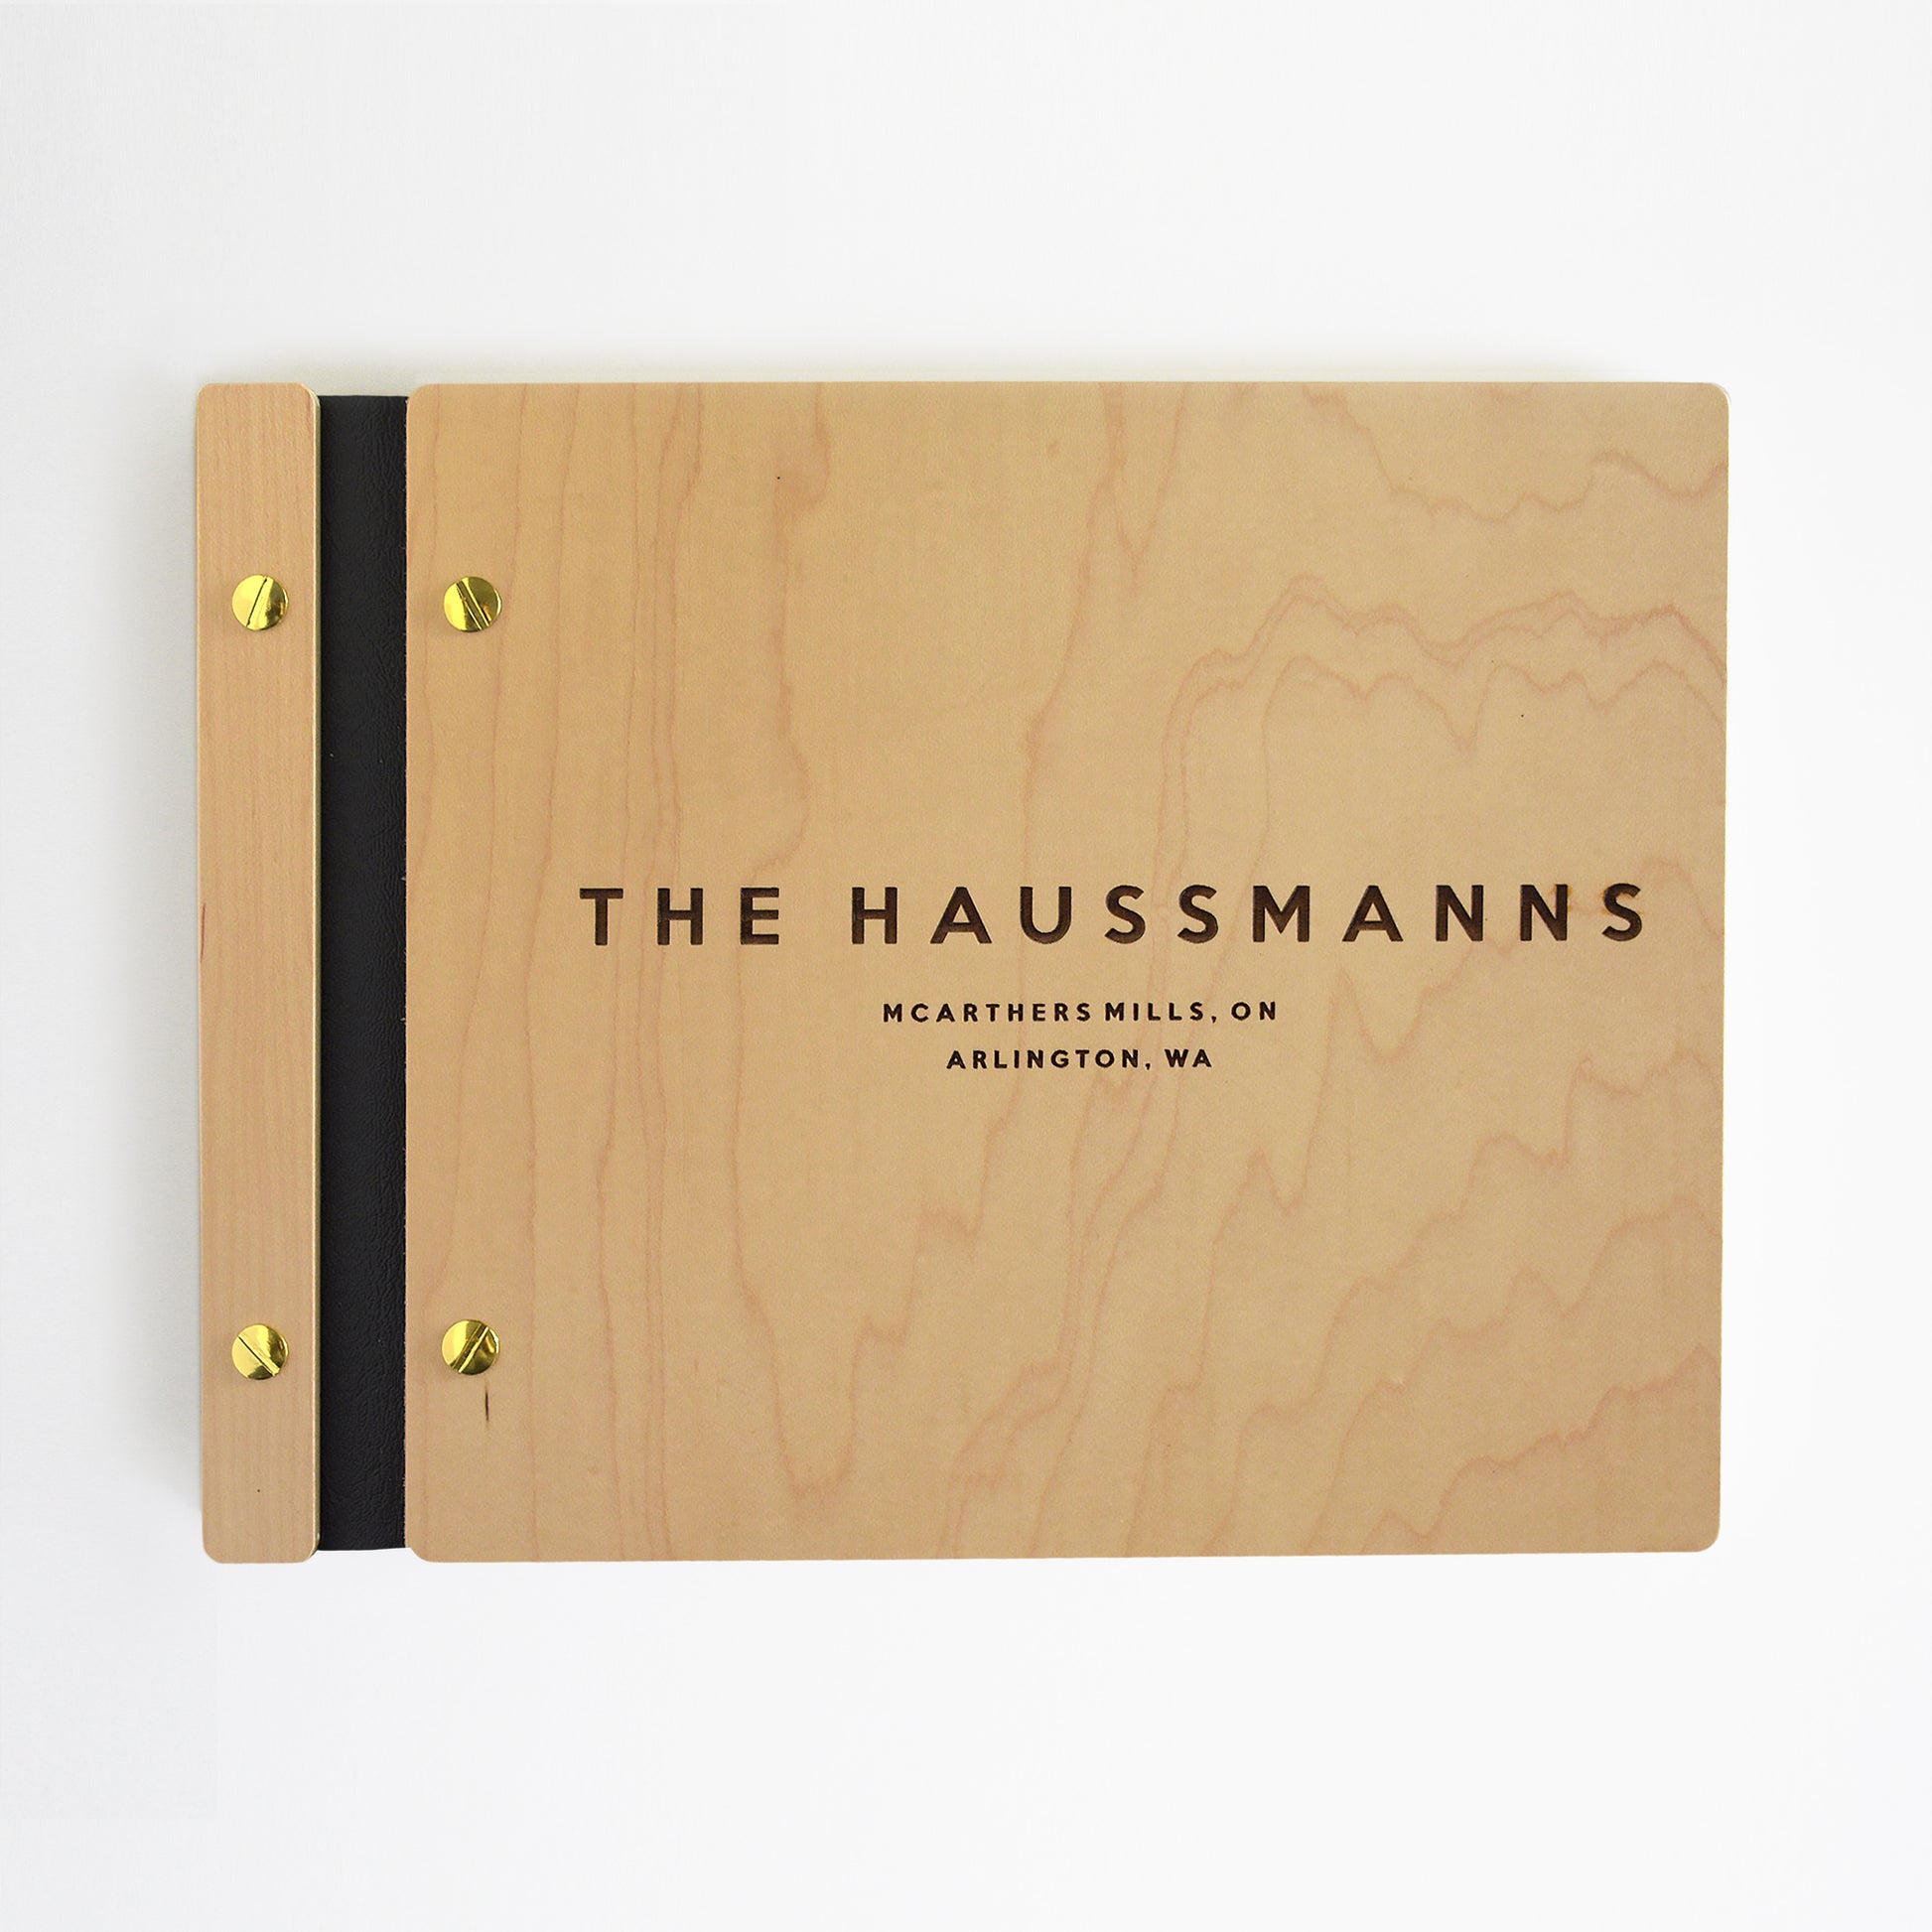 An 8.5x11" guest book lies on a table. Made of maple wood, black vegan leather binding, and gold hardware. The front cover includes an engraved design with personalized names.